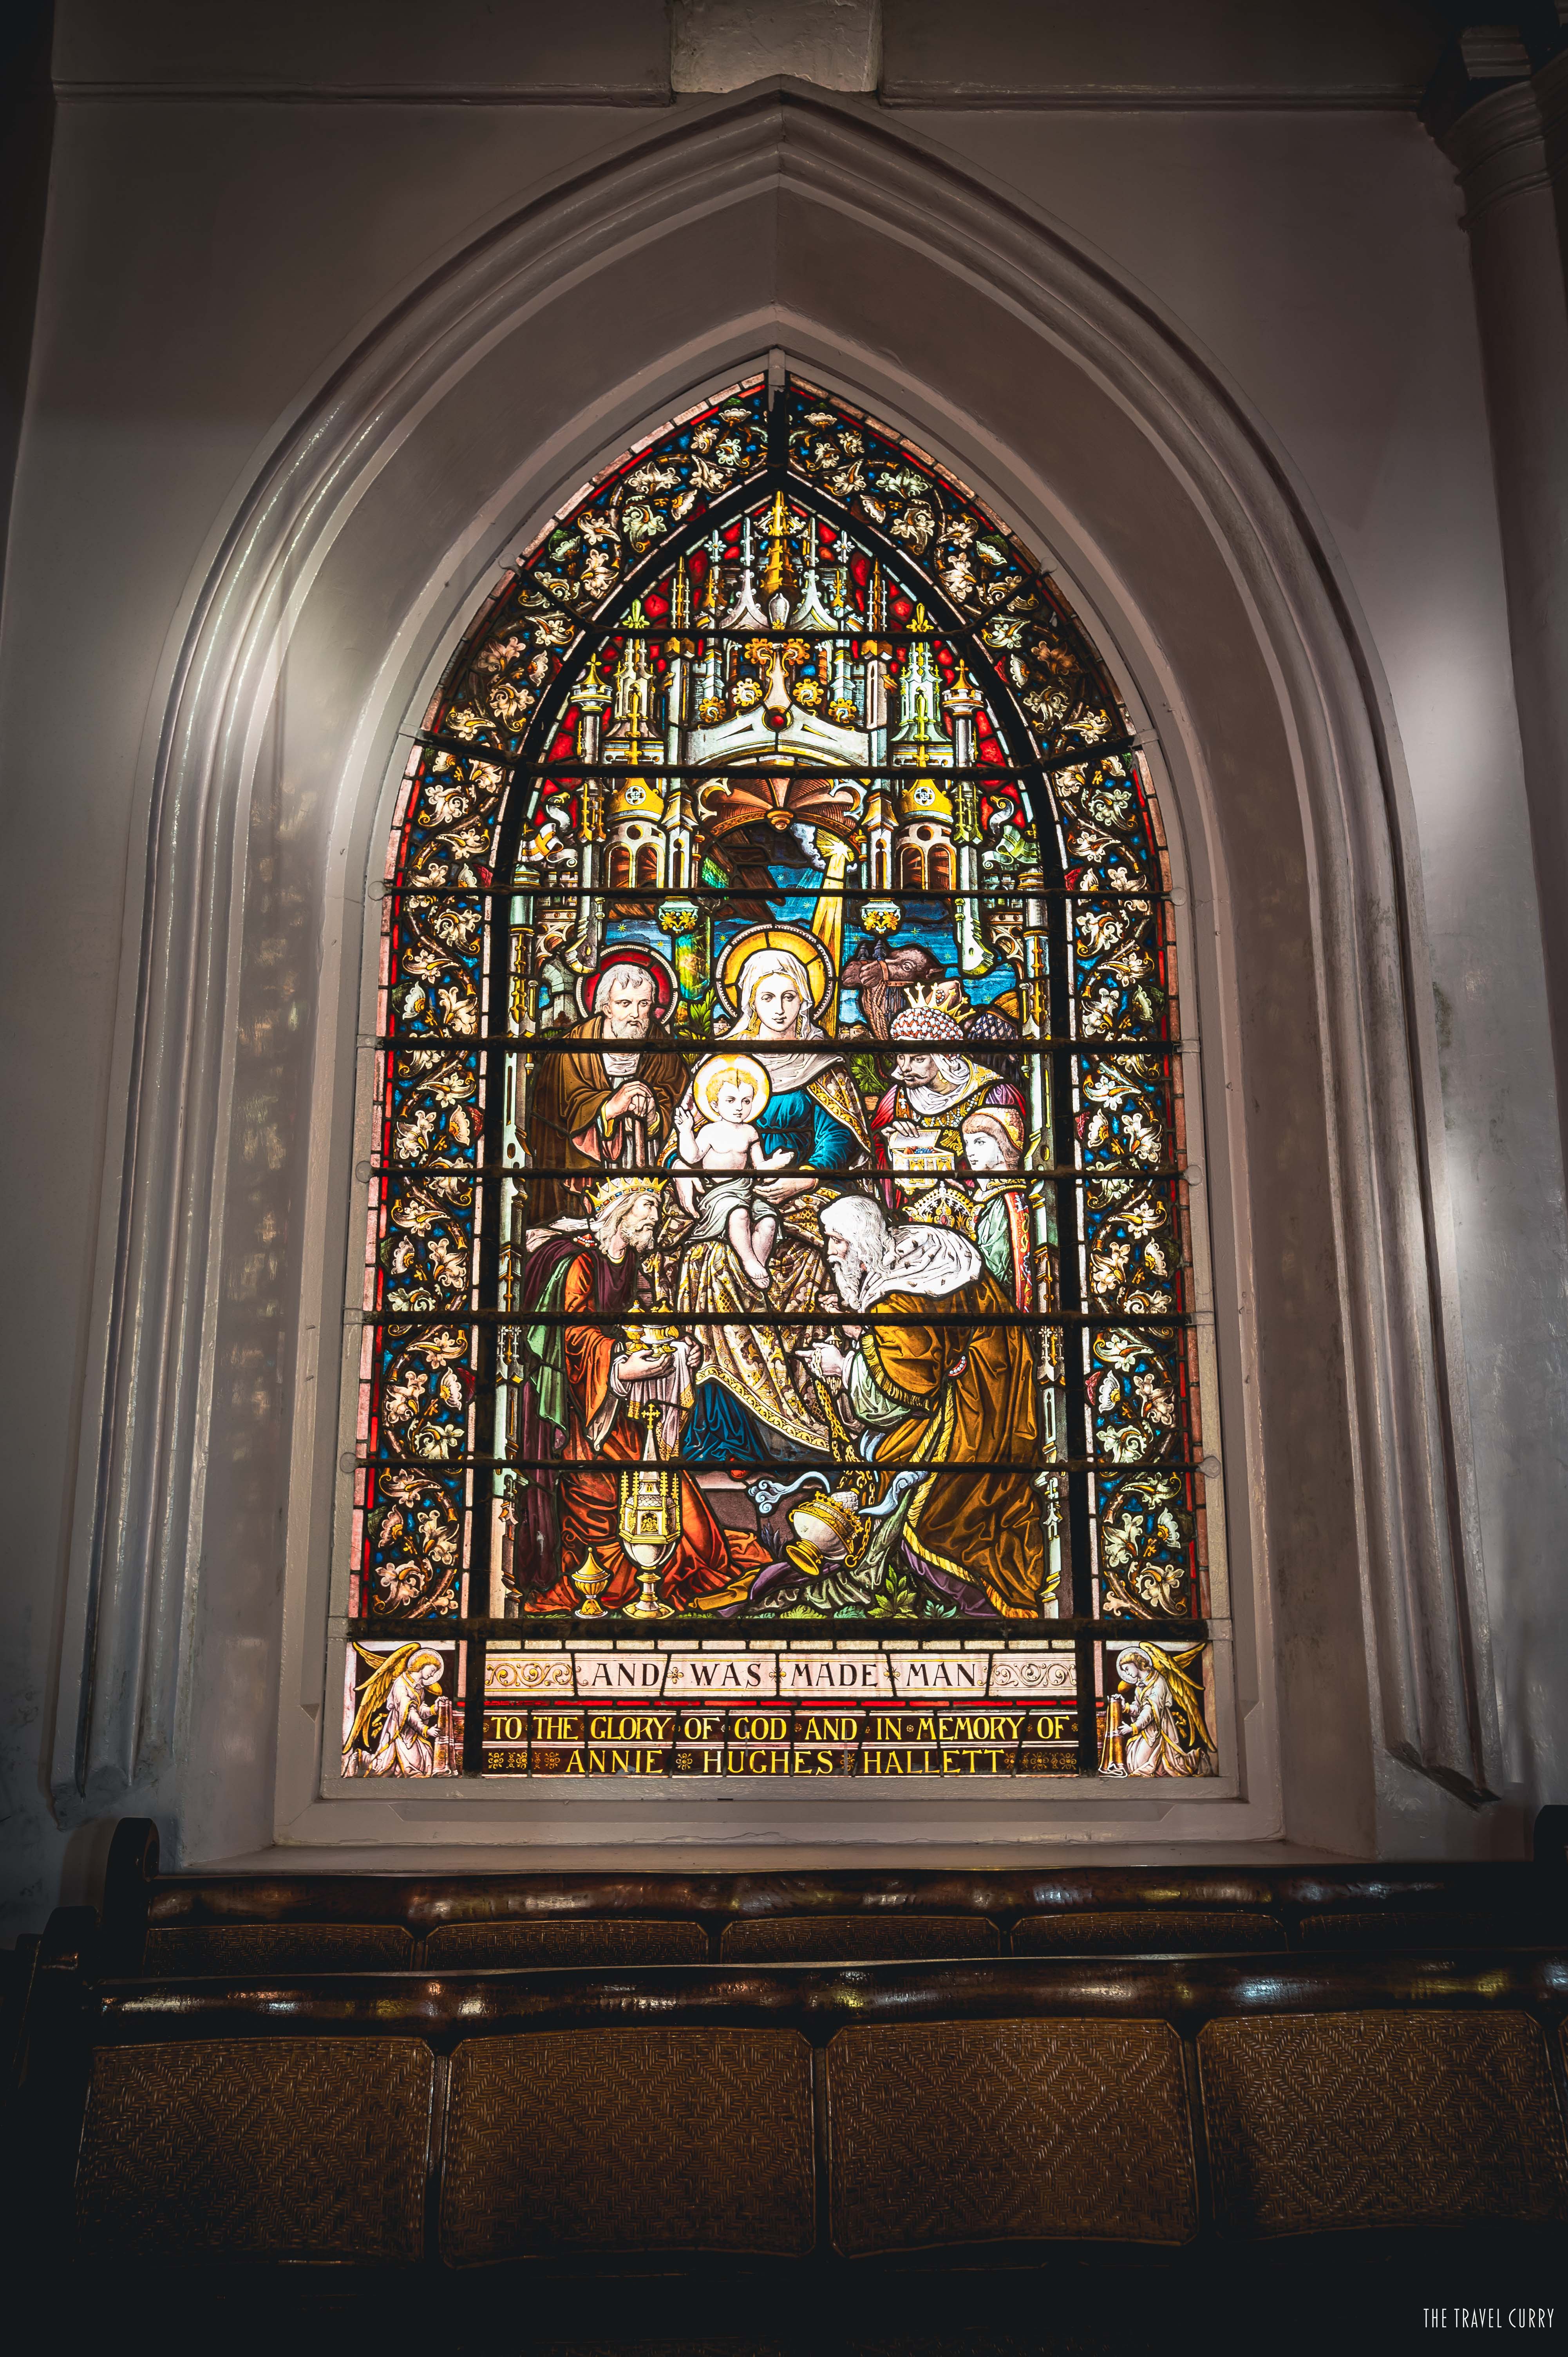 Stained glass window inside St. Stephen's church